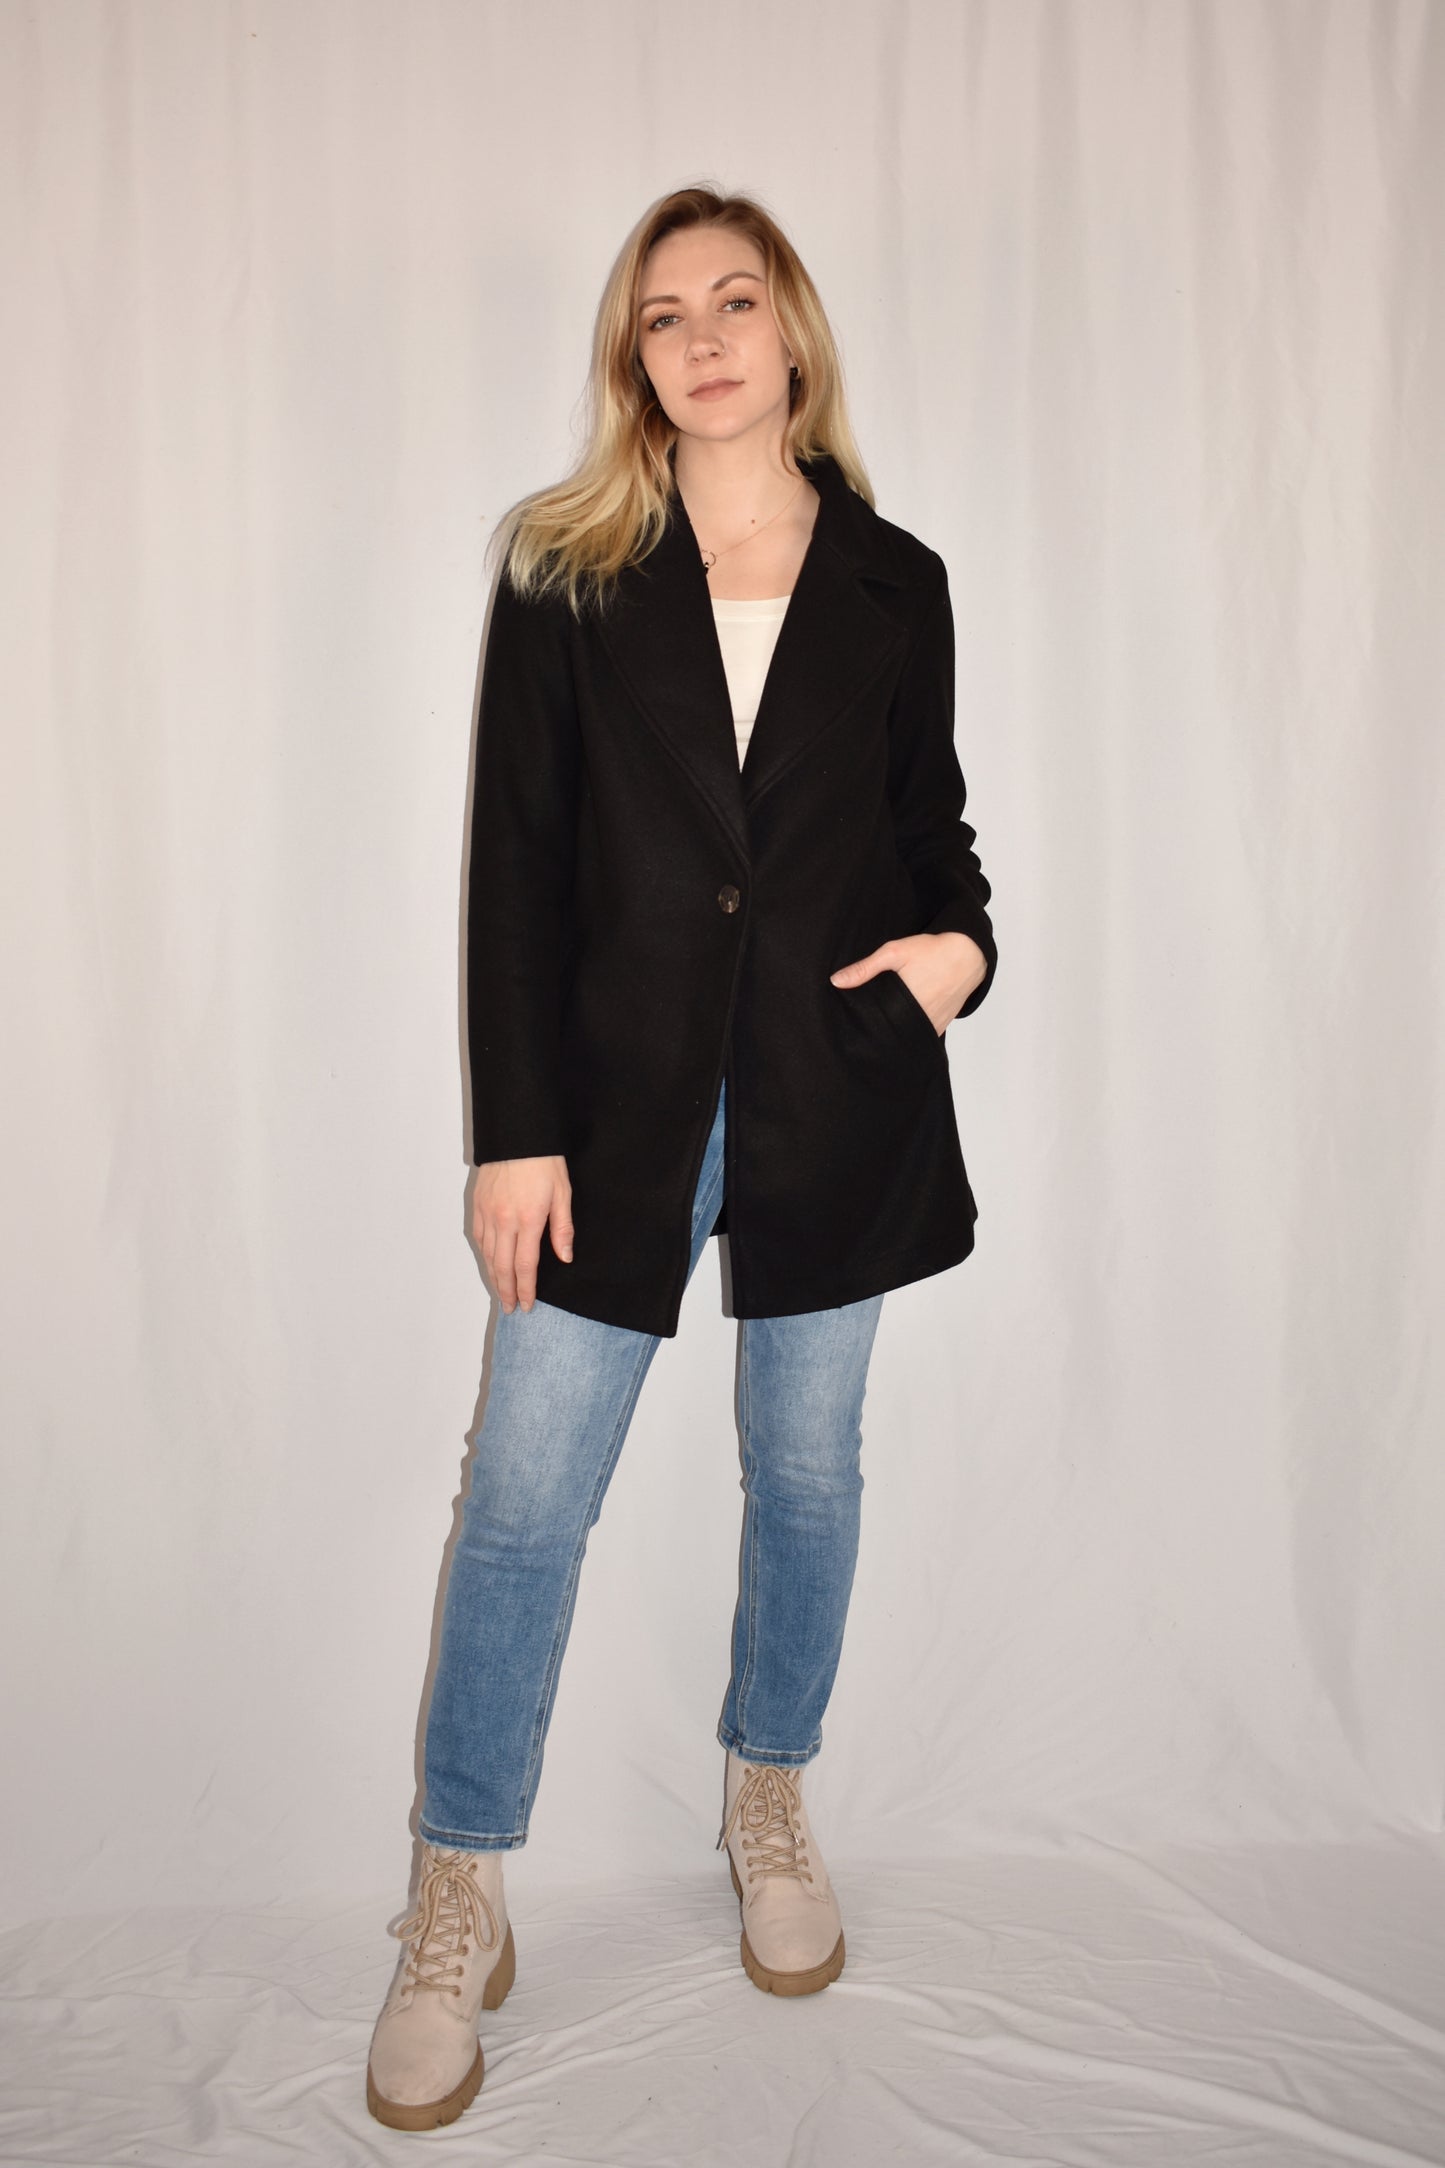 classic pea coat with side pockets, one button enclosure, hip length.